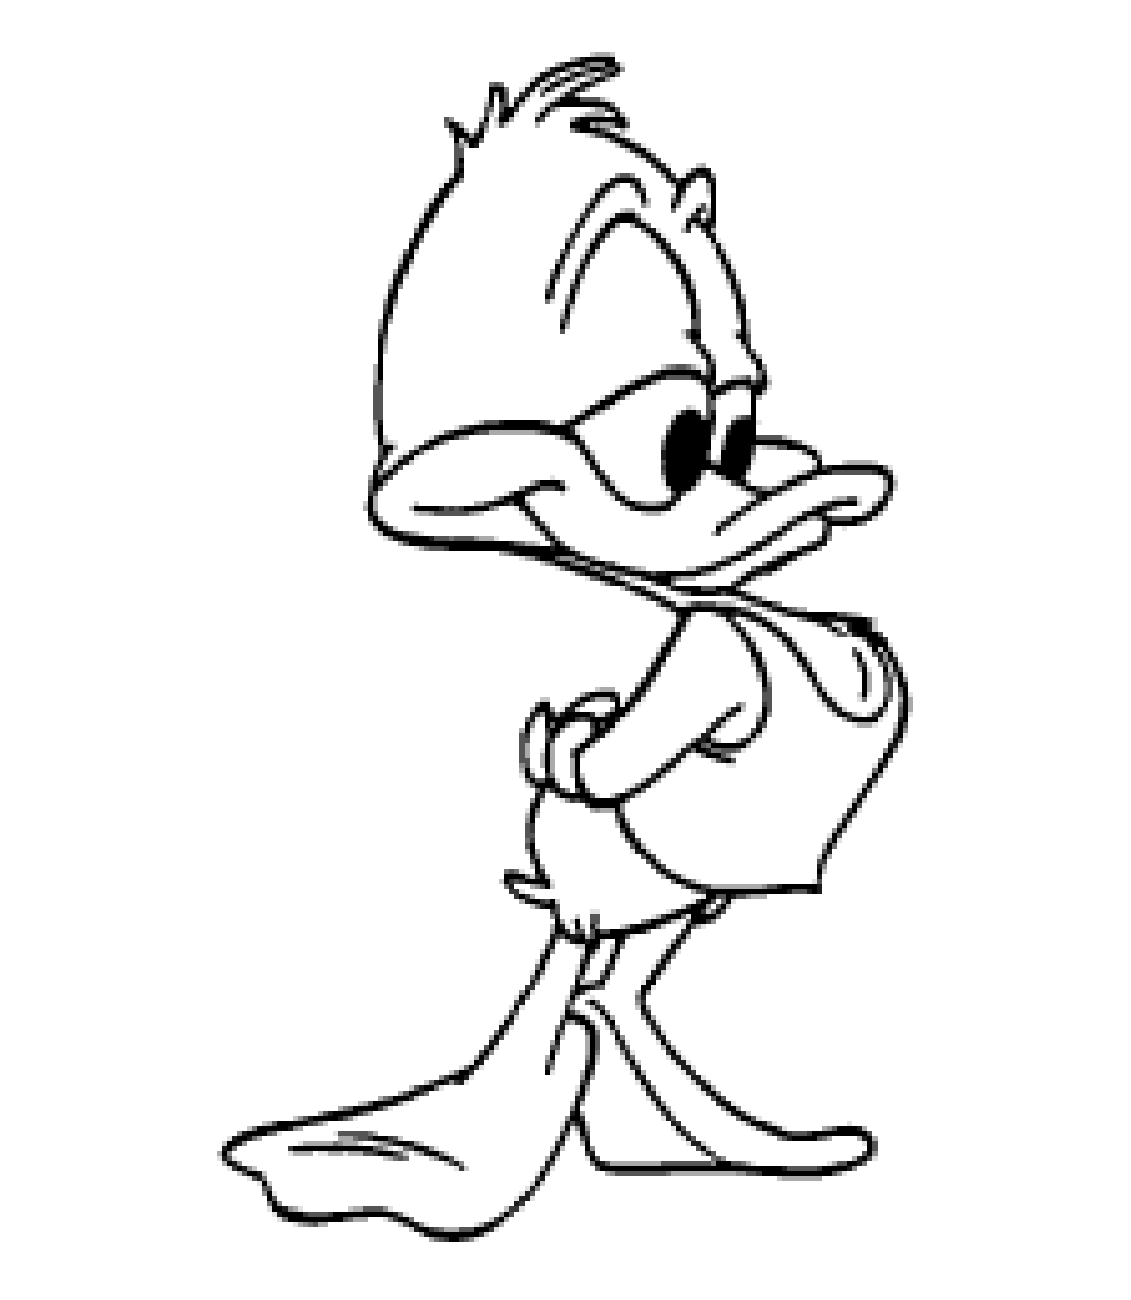 Cartoon Faces Characters Coloring Pages - Coloring Pages For All Ages